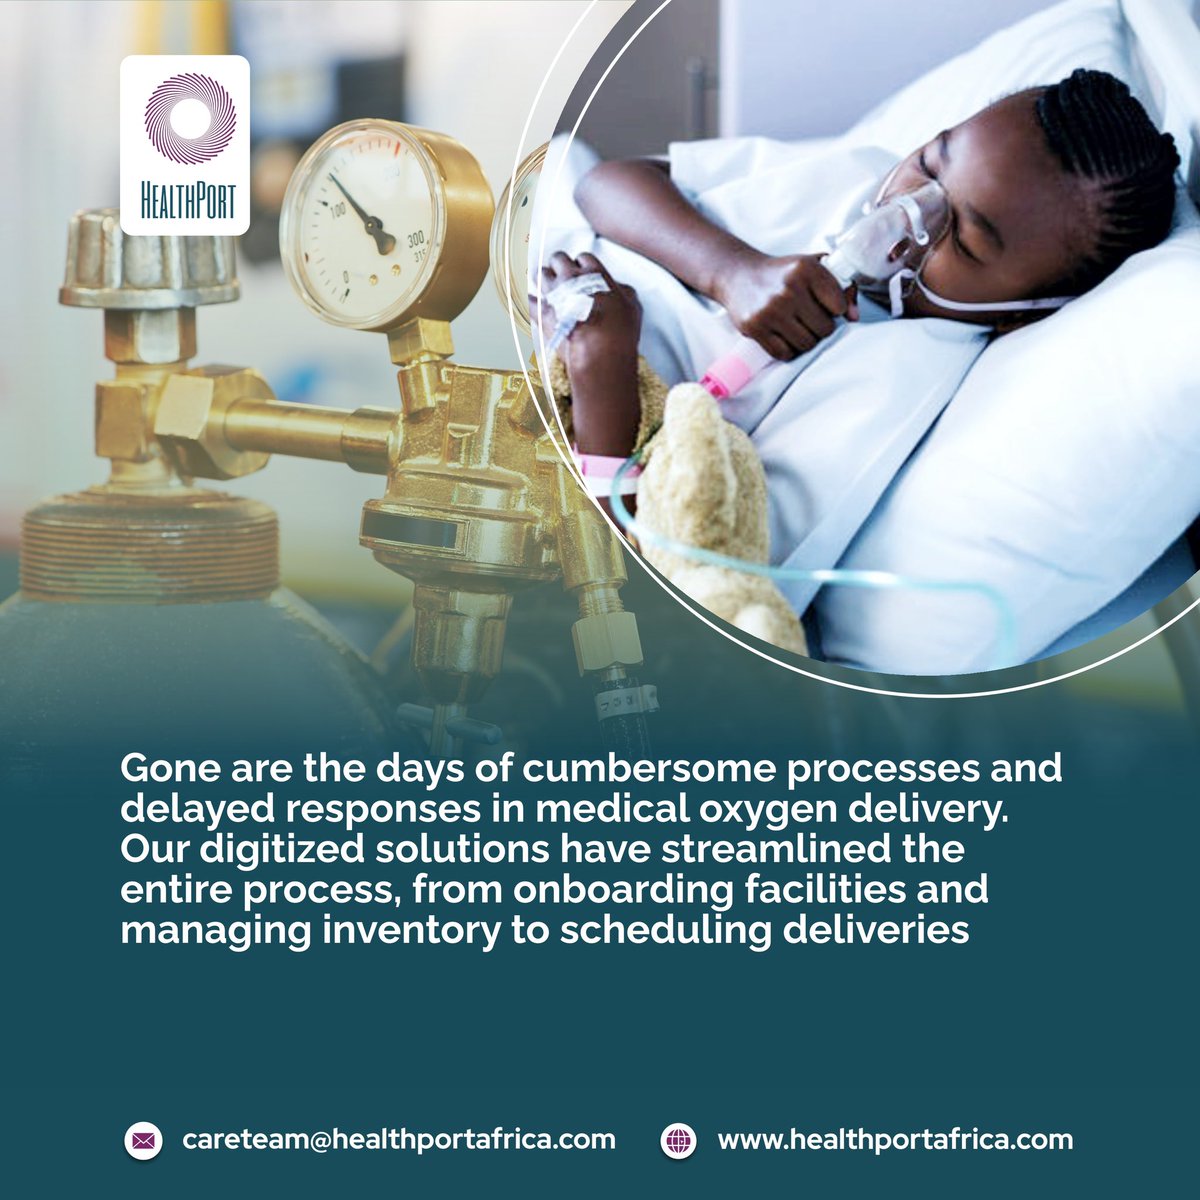 Every aspect of the process, from hospital enrollment to supply management, delivery coordination, oxygen monitoring, and patient consumption tracking, is now efficient and effective. We’ve made significant strides in streamlining the delivery of medical oxygen.  #healthport